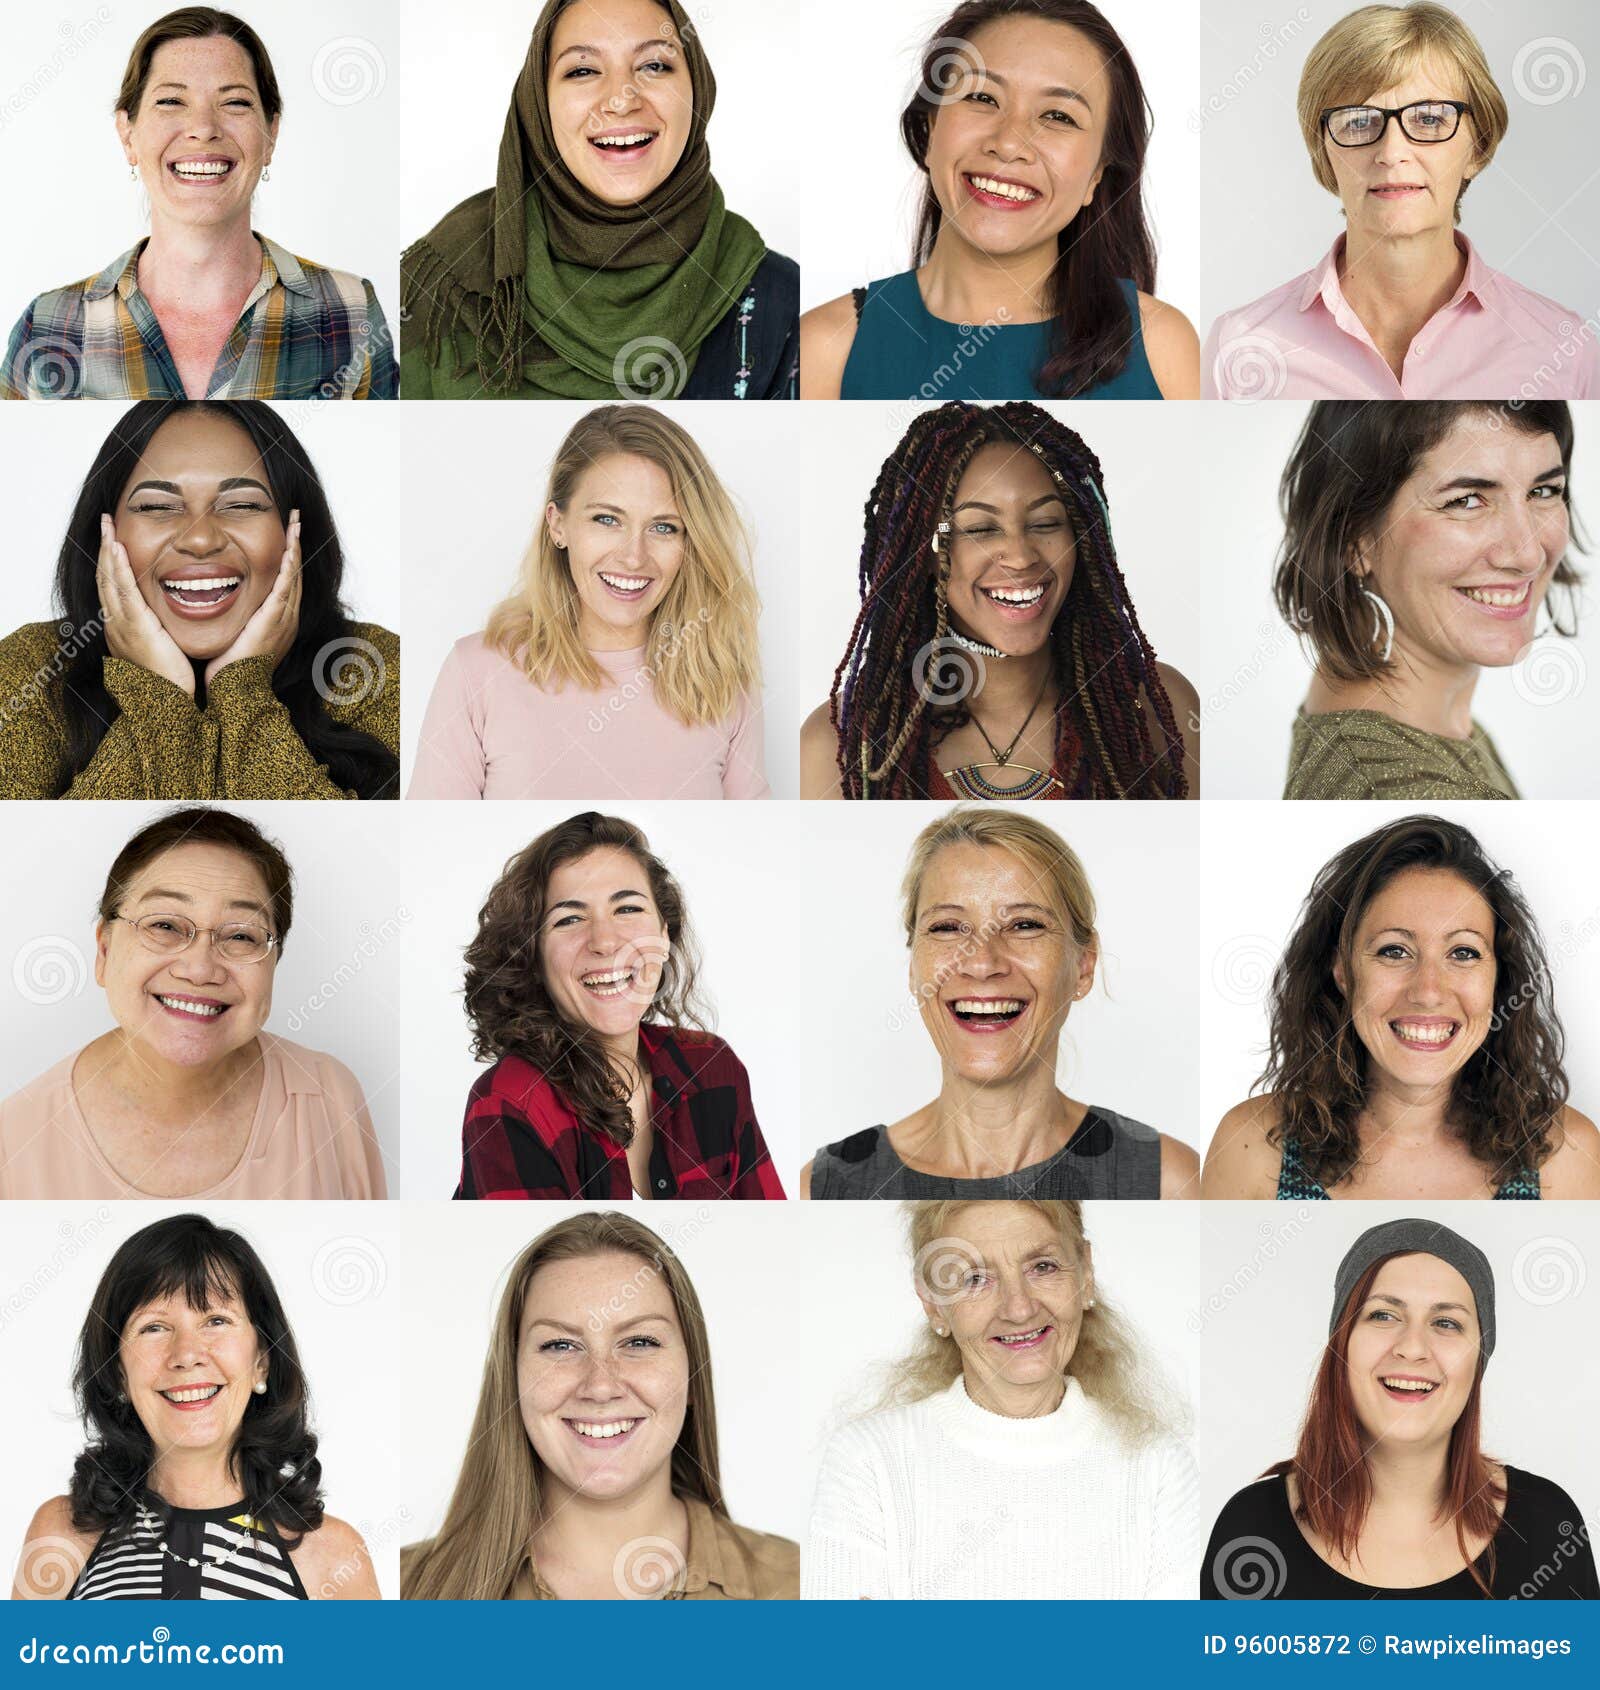 people set of diversity women with smiling face expression studio collage